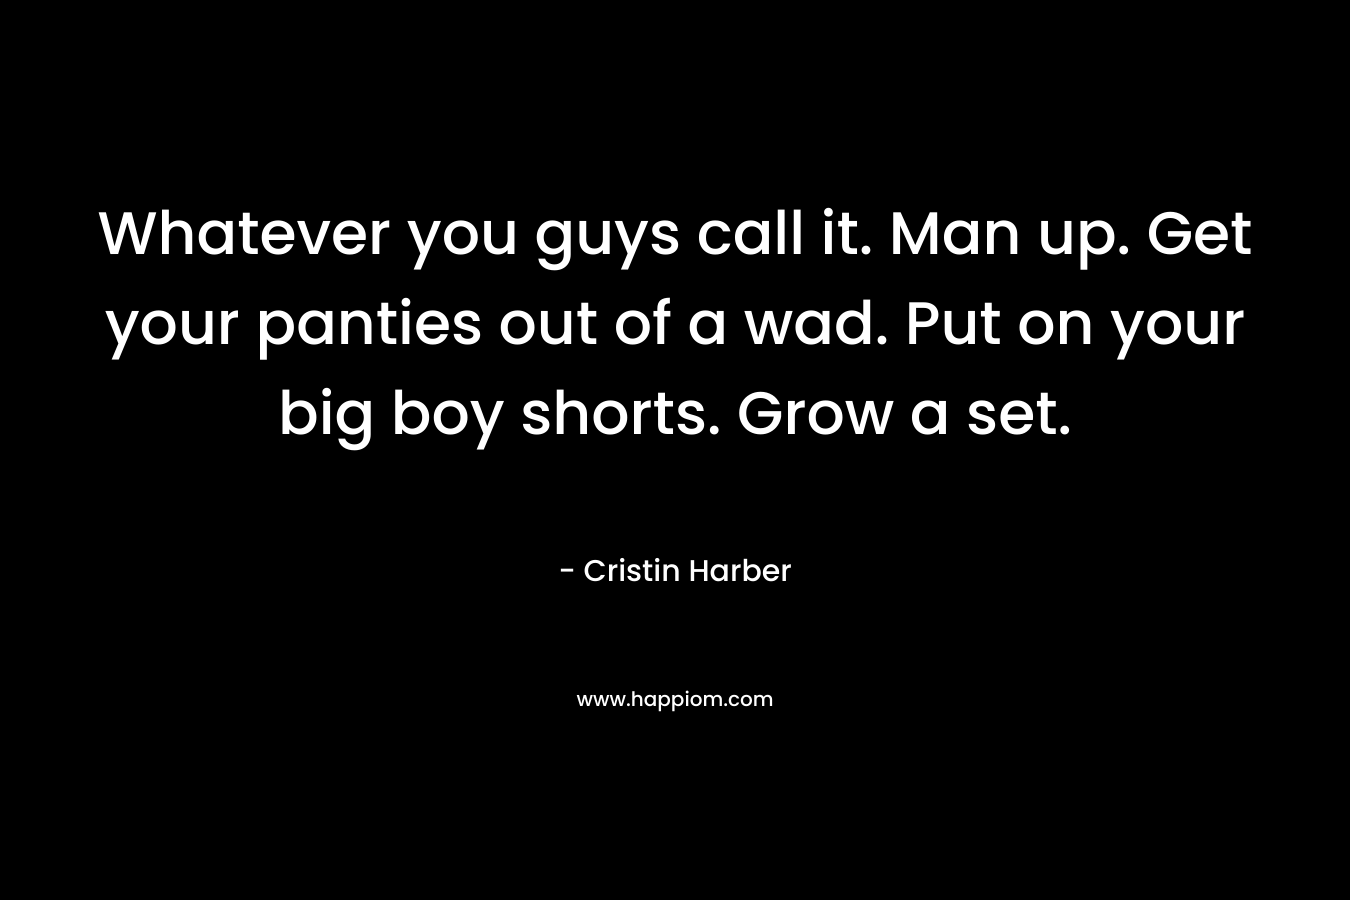 Whatever you guys call it. Man up. Get your panties out of a wad. Put on your big boy shorts. Grow a set. – Cristin Harber